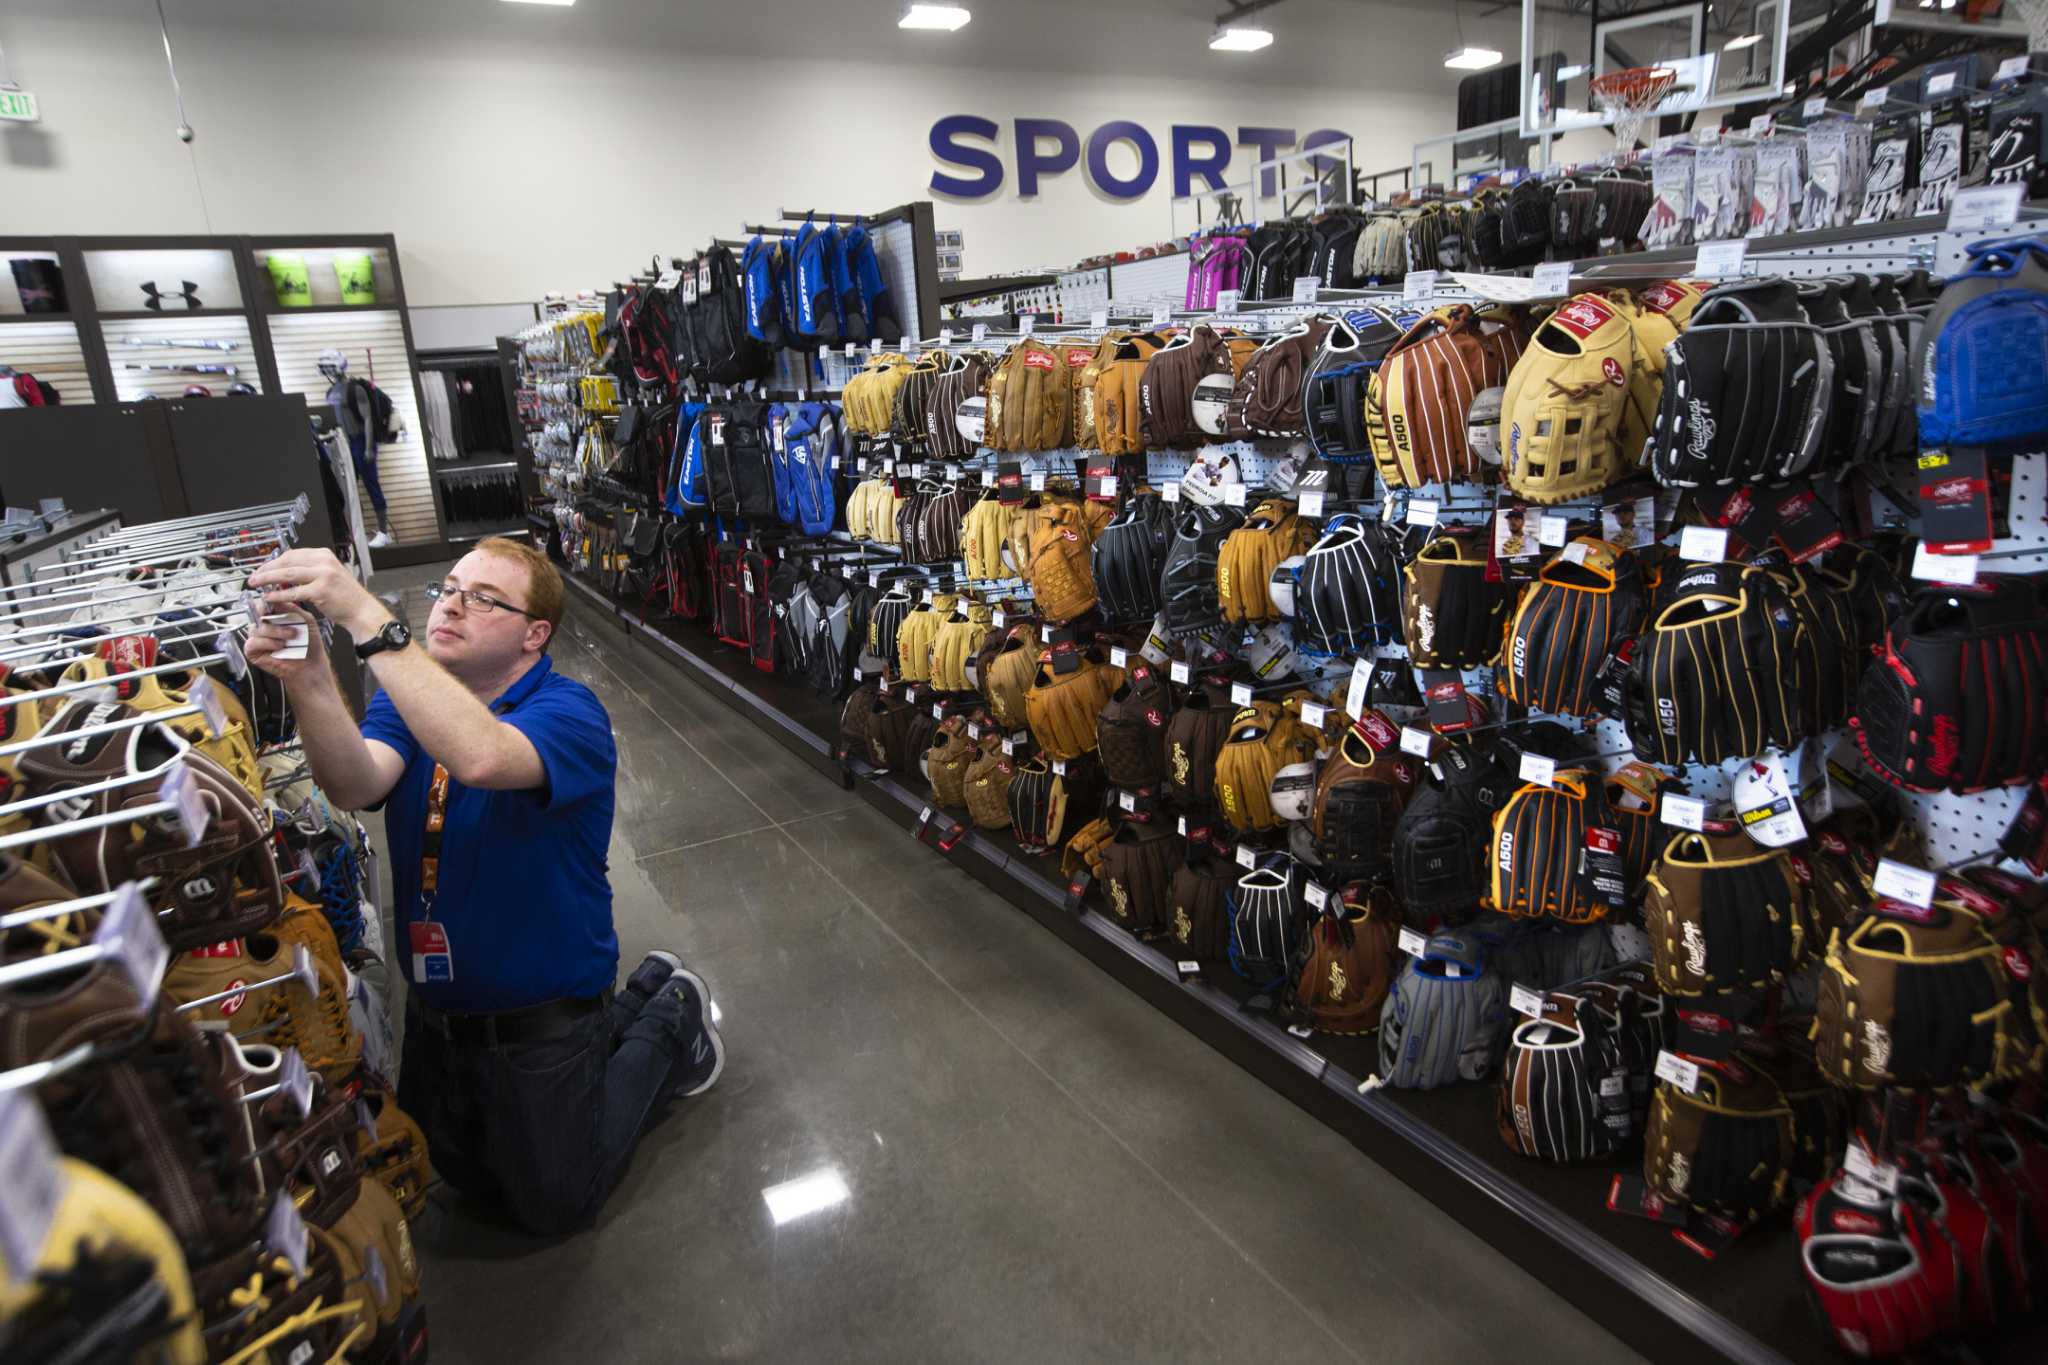 Academy top S.A. sporting goods store